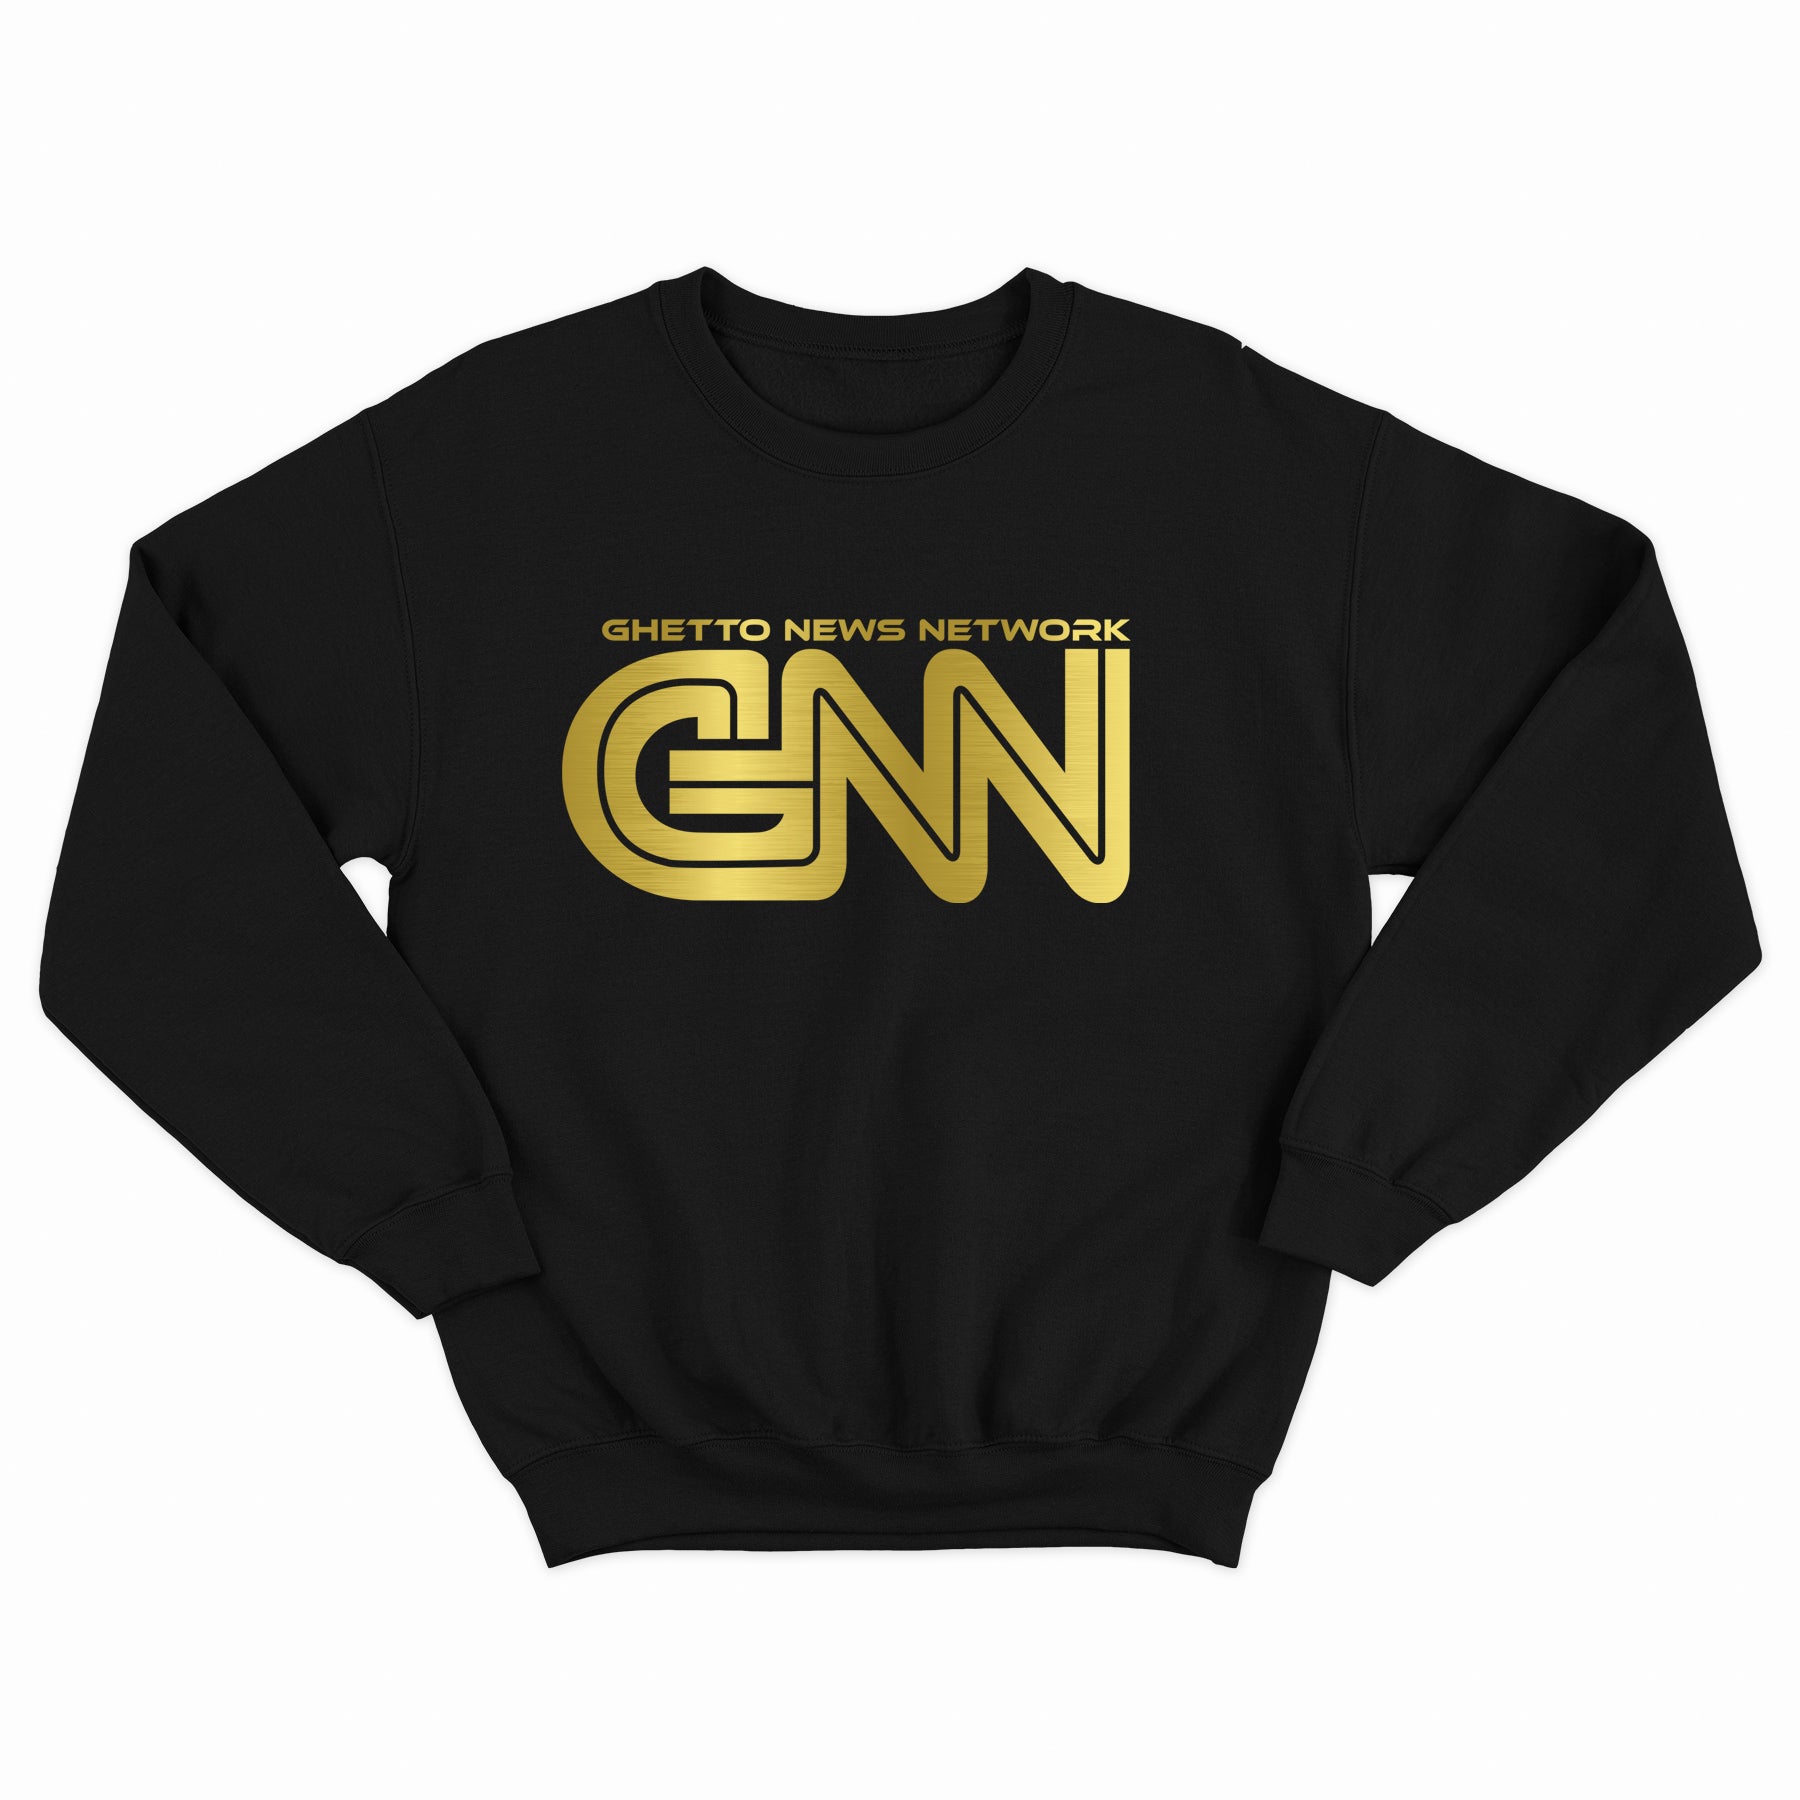 Shop and Buy or Watch Ghetto News Network